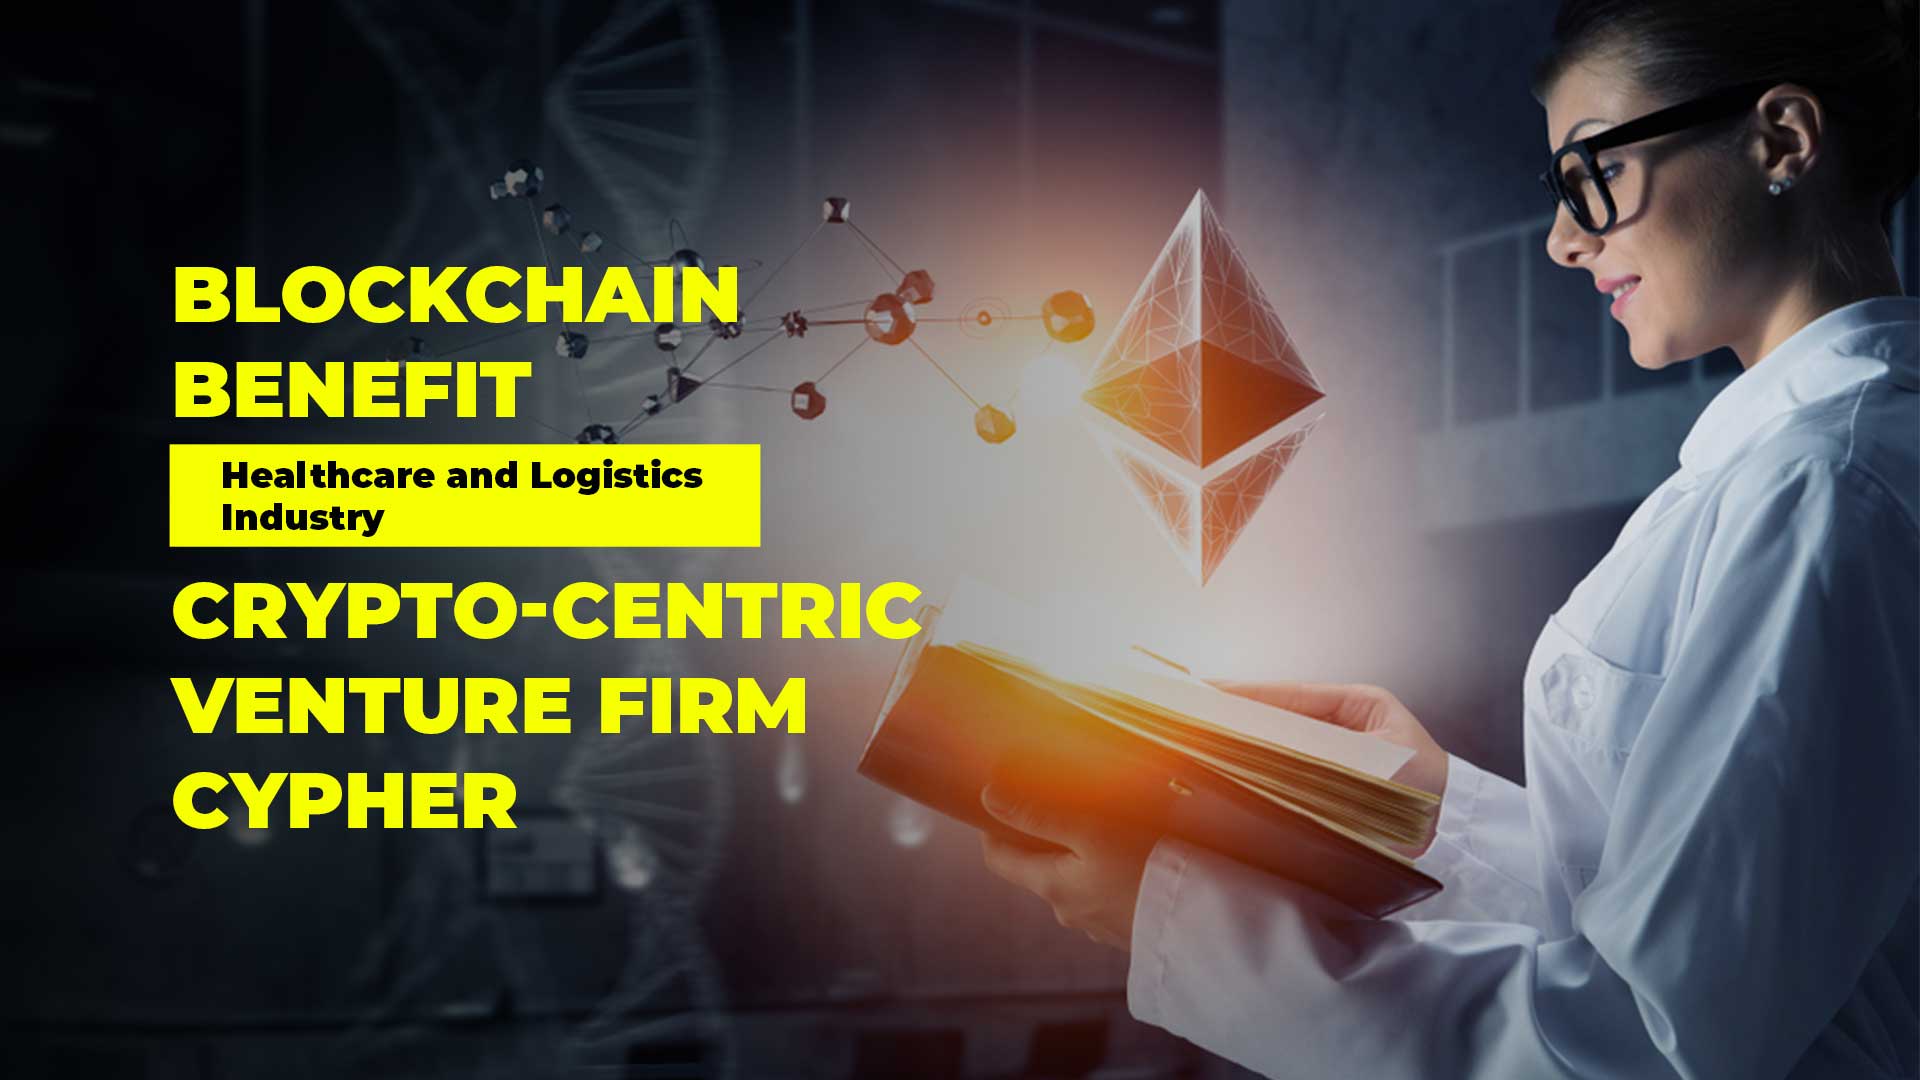 Blockchain Benefit Healthcare and Logistics Industry – Crypto-Centric Venture Firm Cypher 